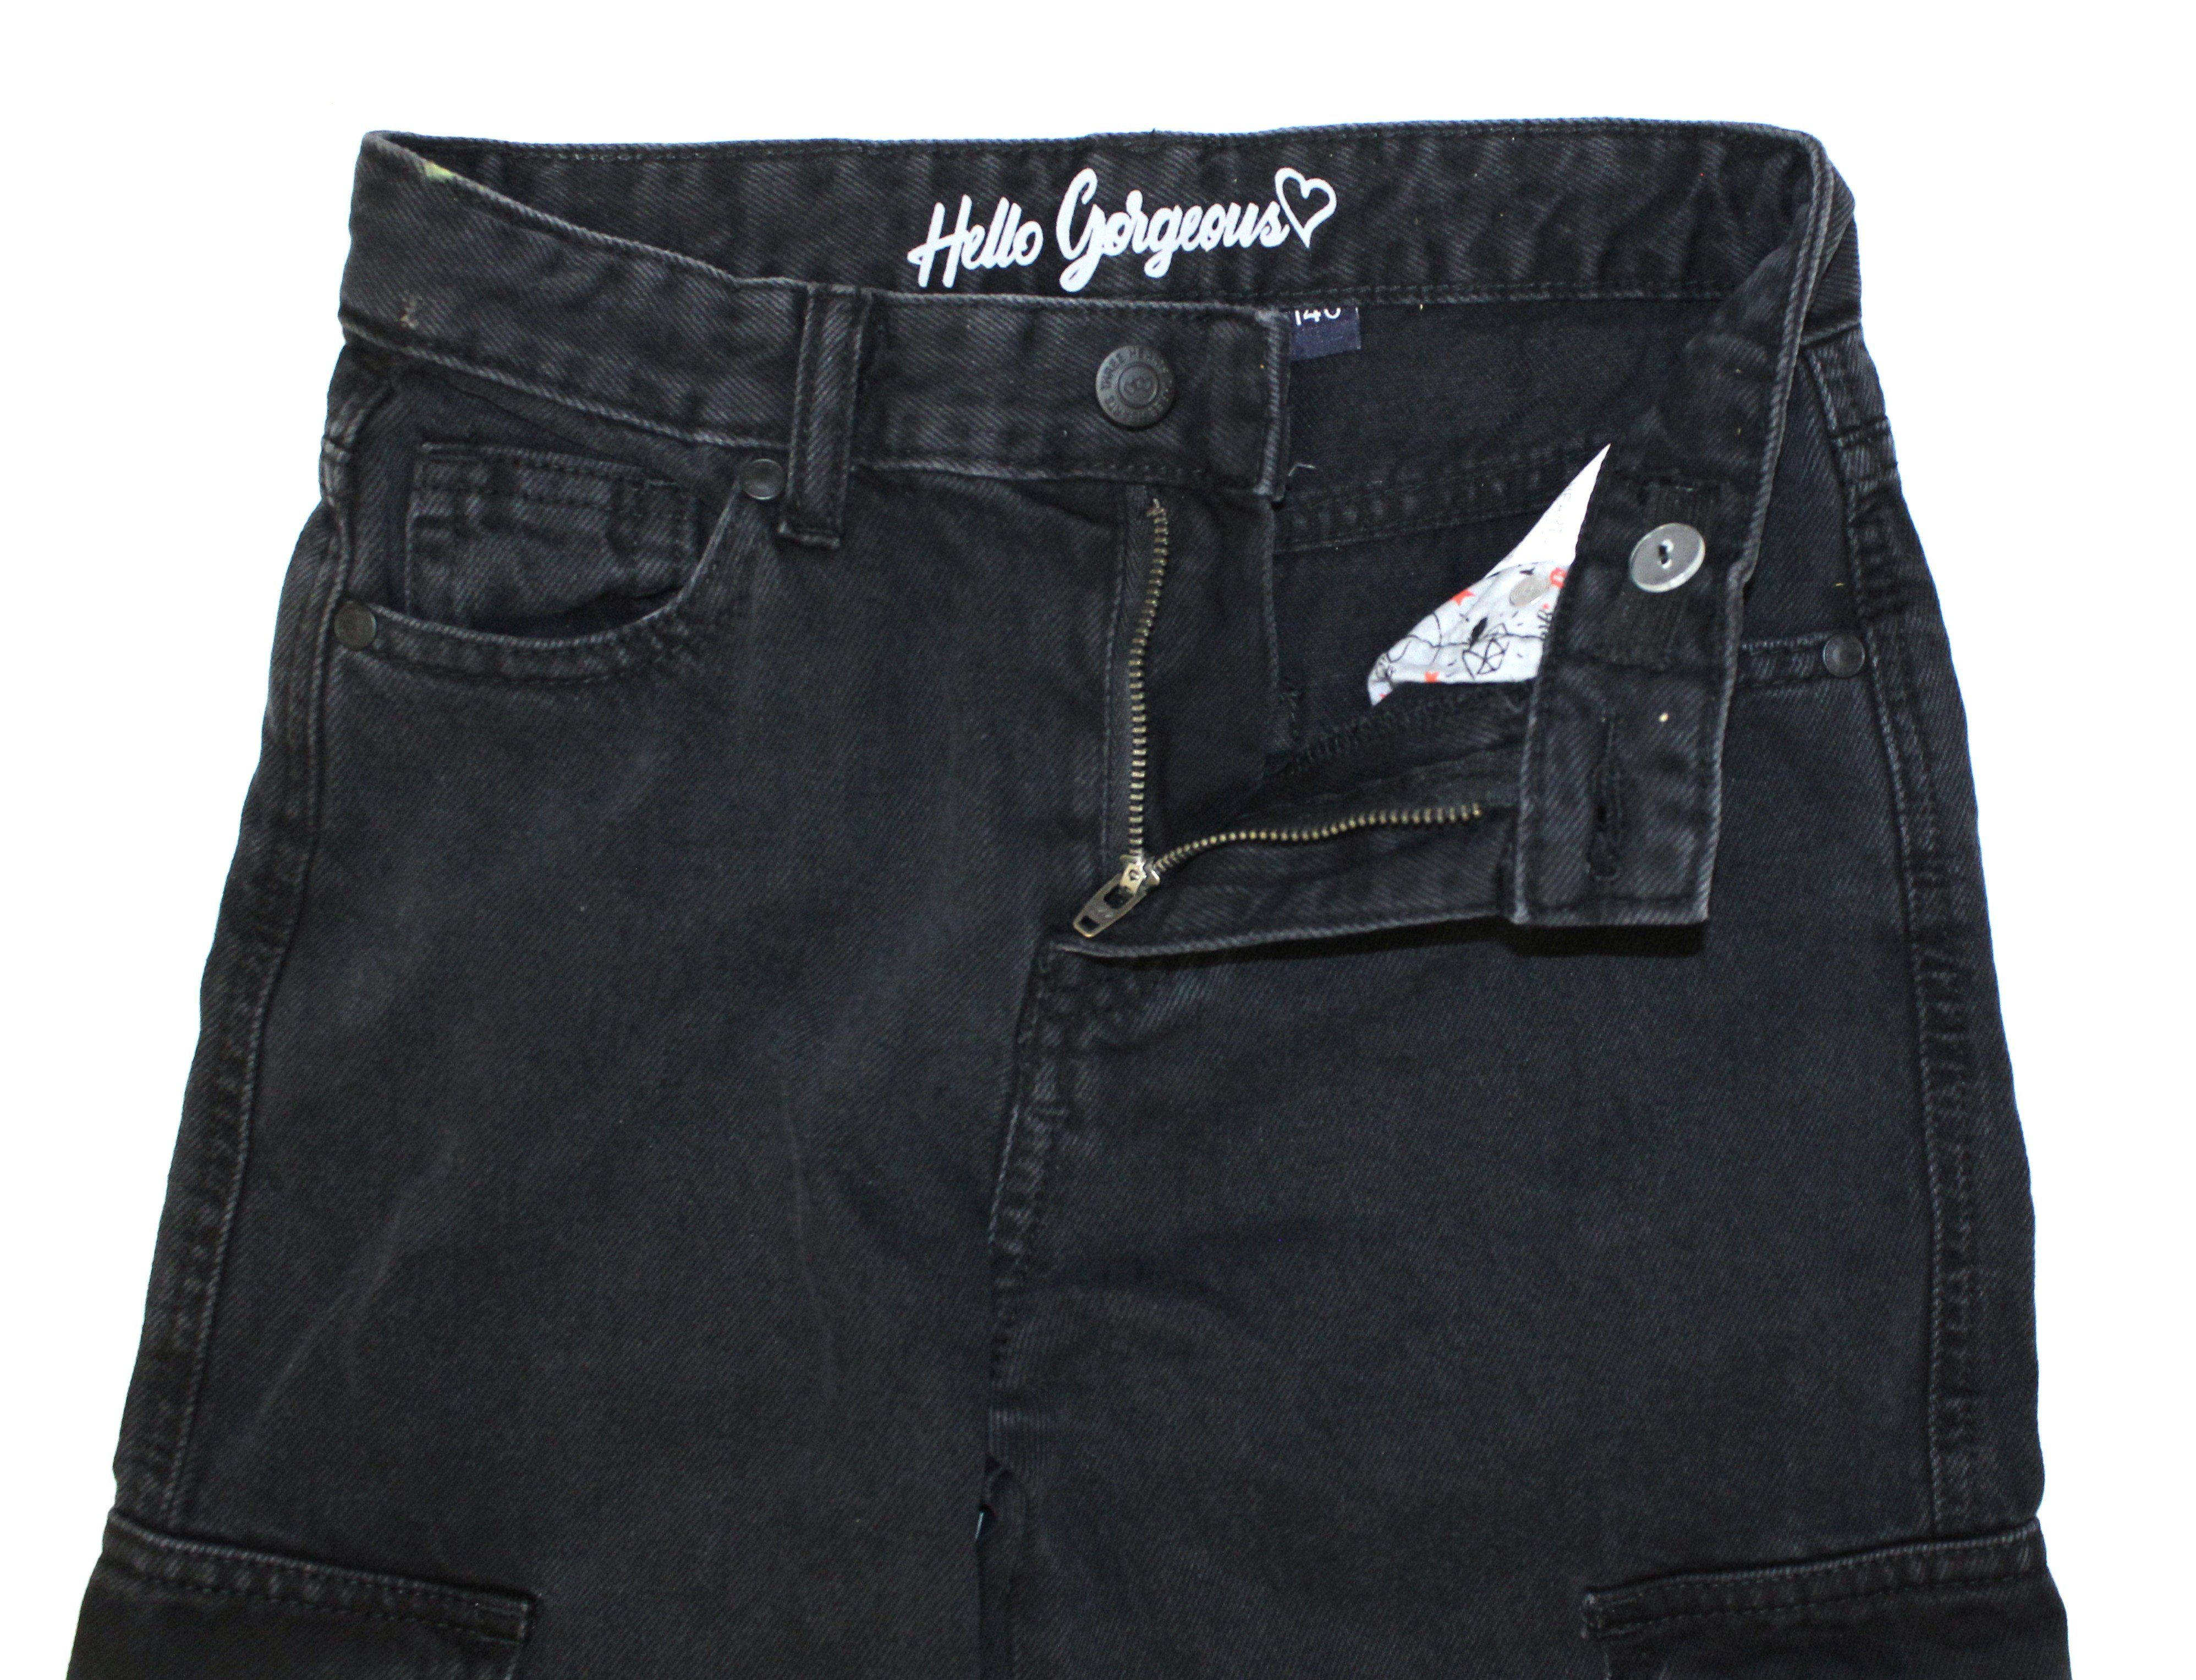 THREE OAKS Cargojeans "THREE HEARTS" Black Jeans (1-tlg) Cargo 387 Mädchen M330204 washed